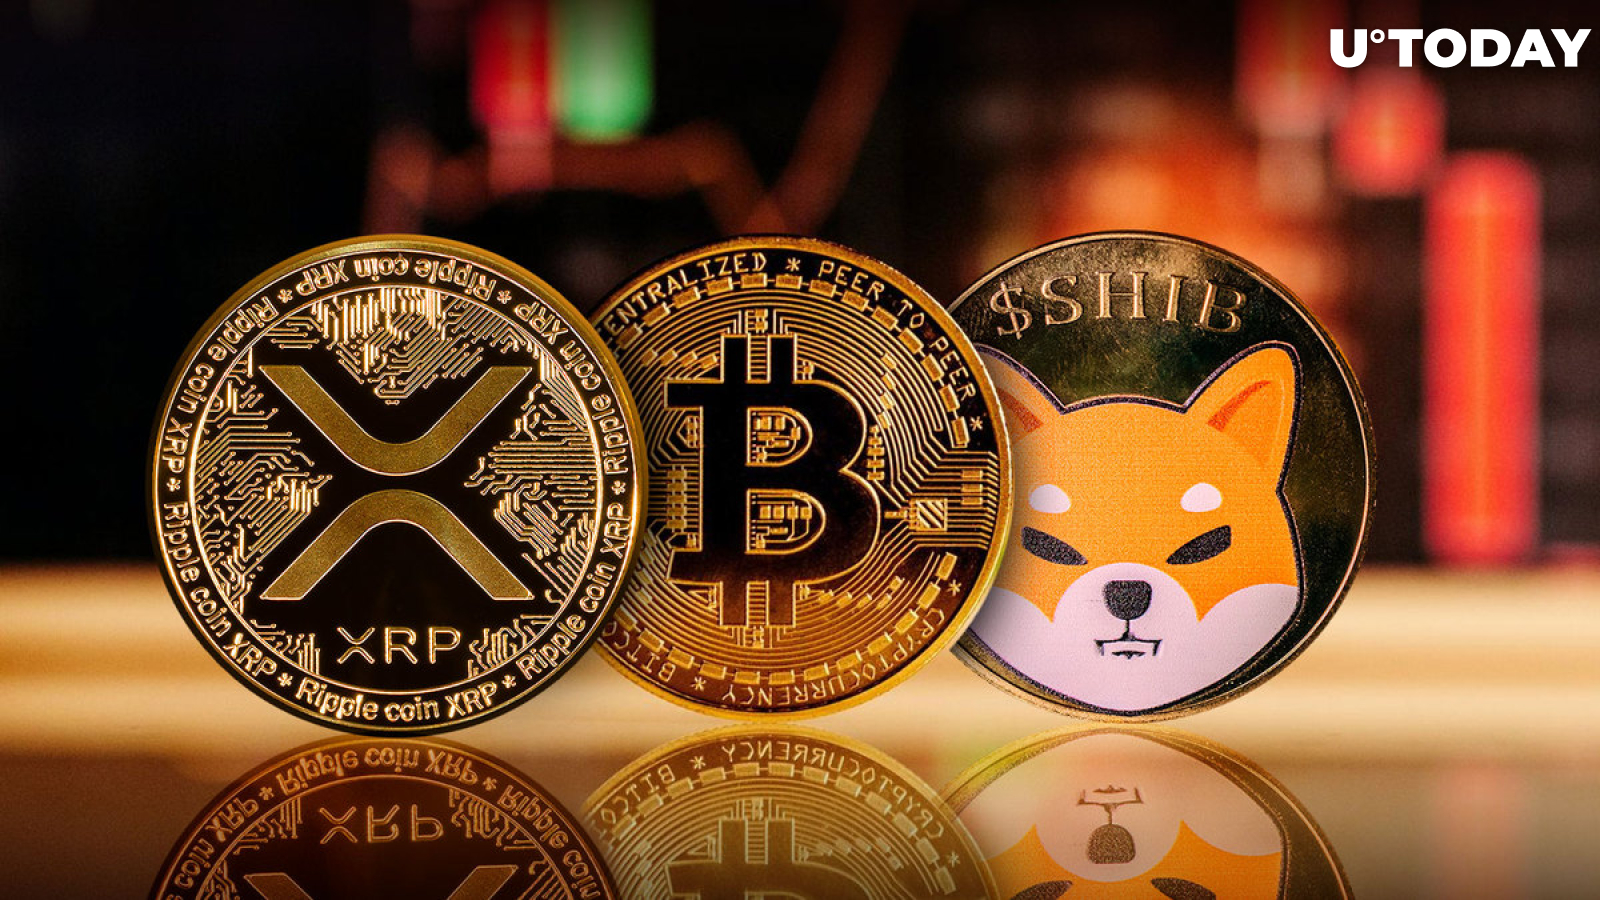 XRP, SHIB, Bitcoin Emerge as Most Angry Cryptocurrencies Amid $455 Million Crypto Bloodbath